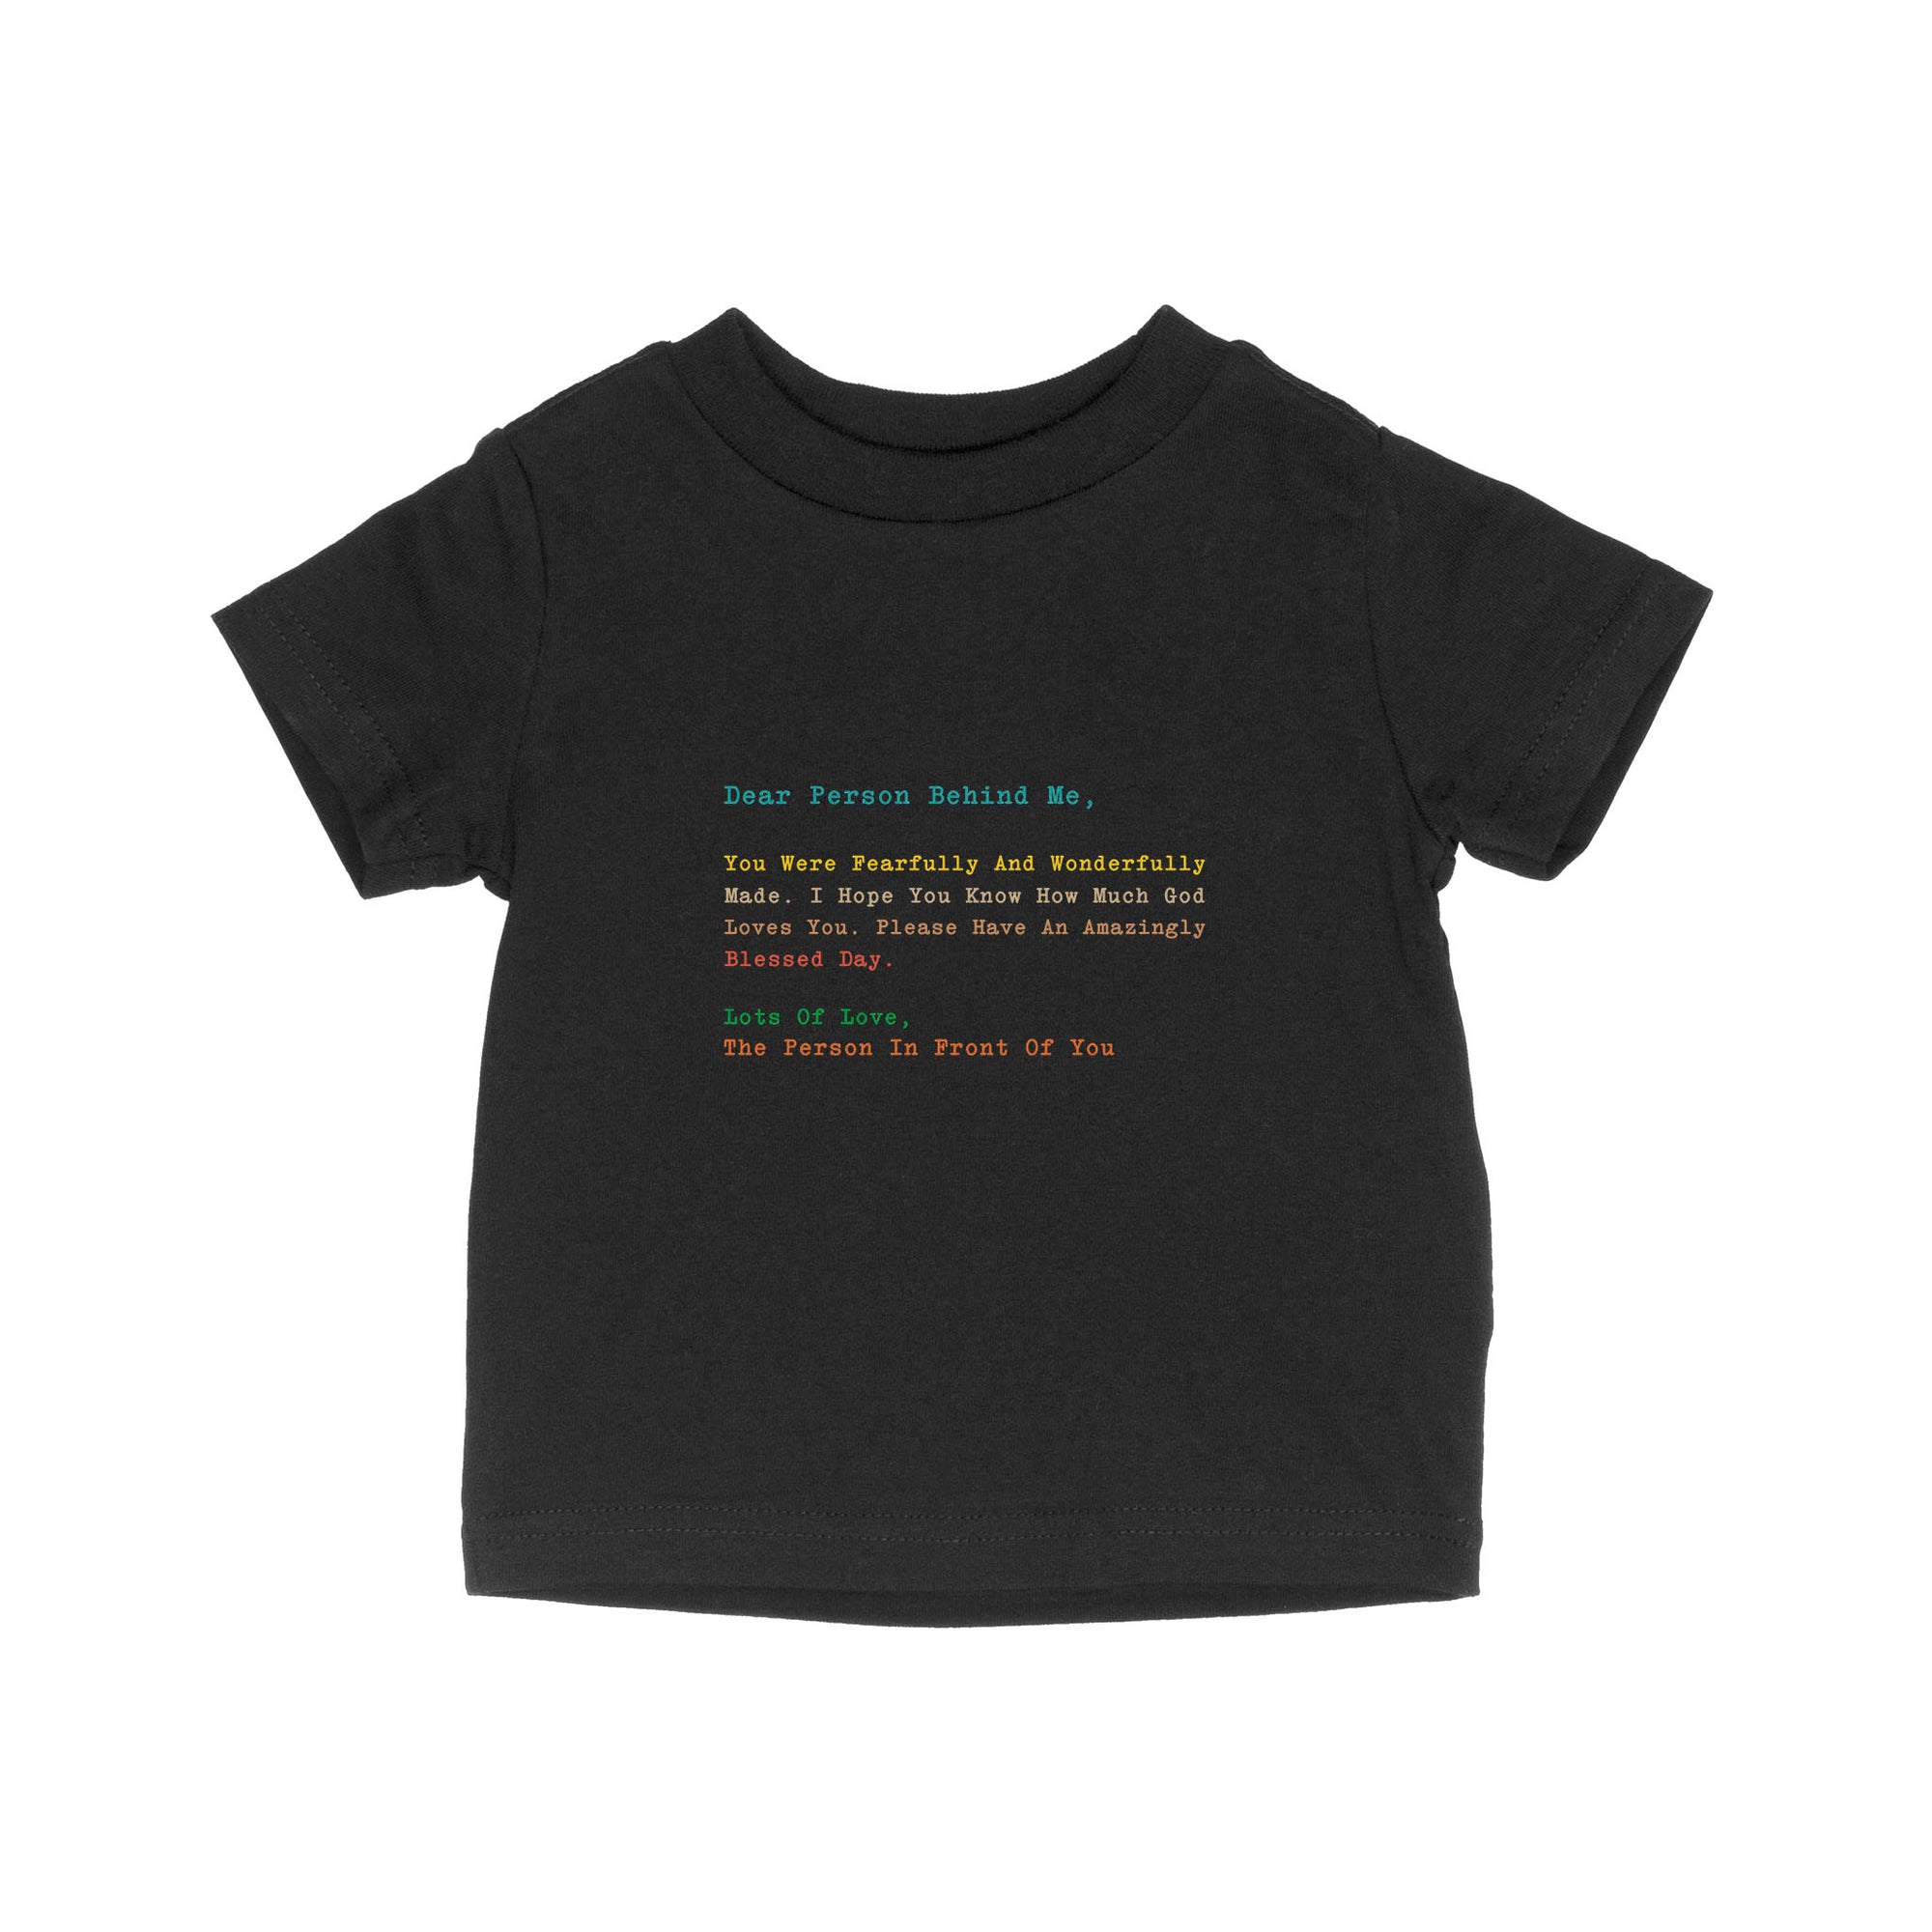 Dear Person Behind Me Jesus Love - Baby T-Shirt